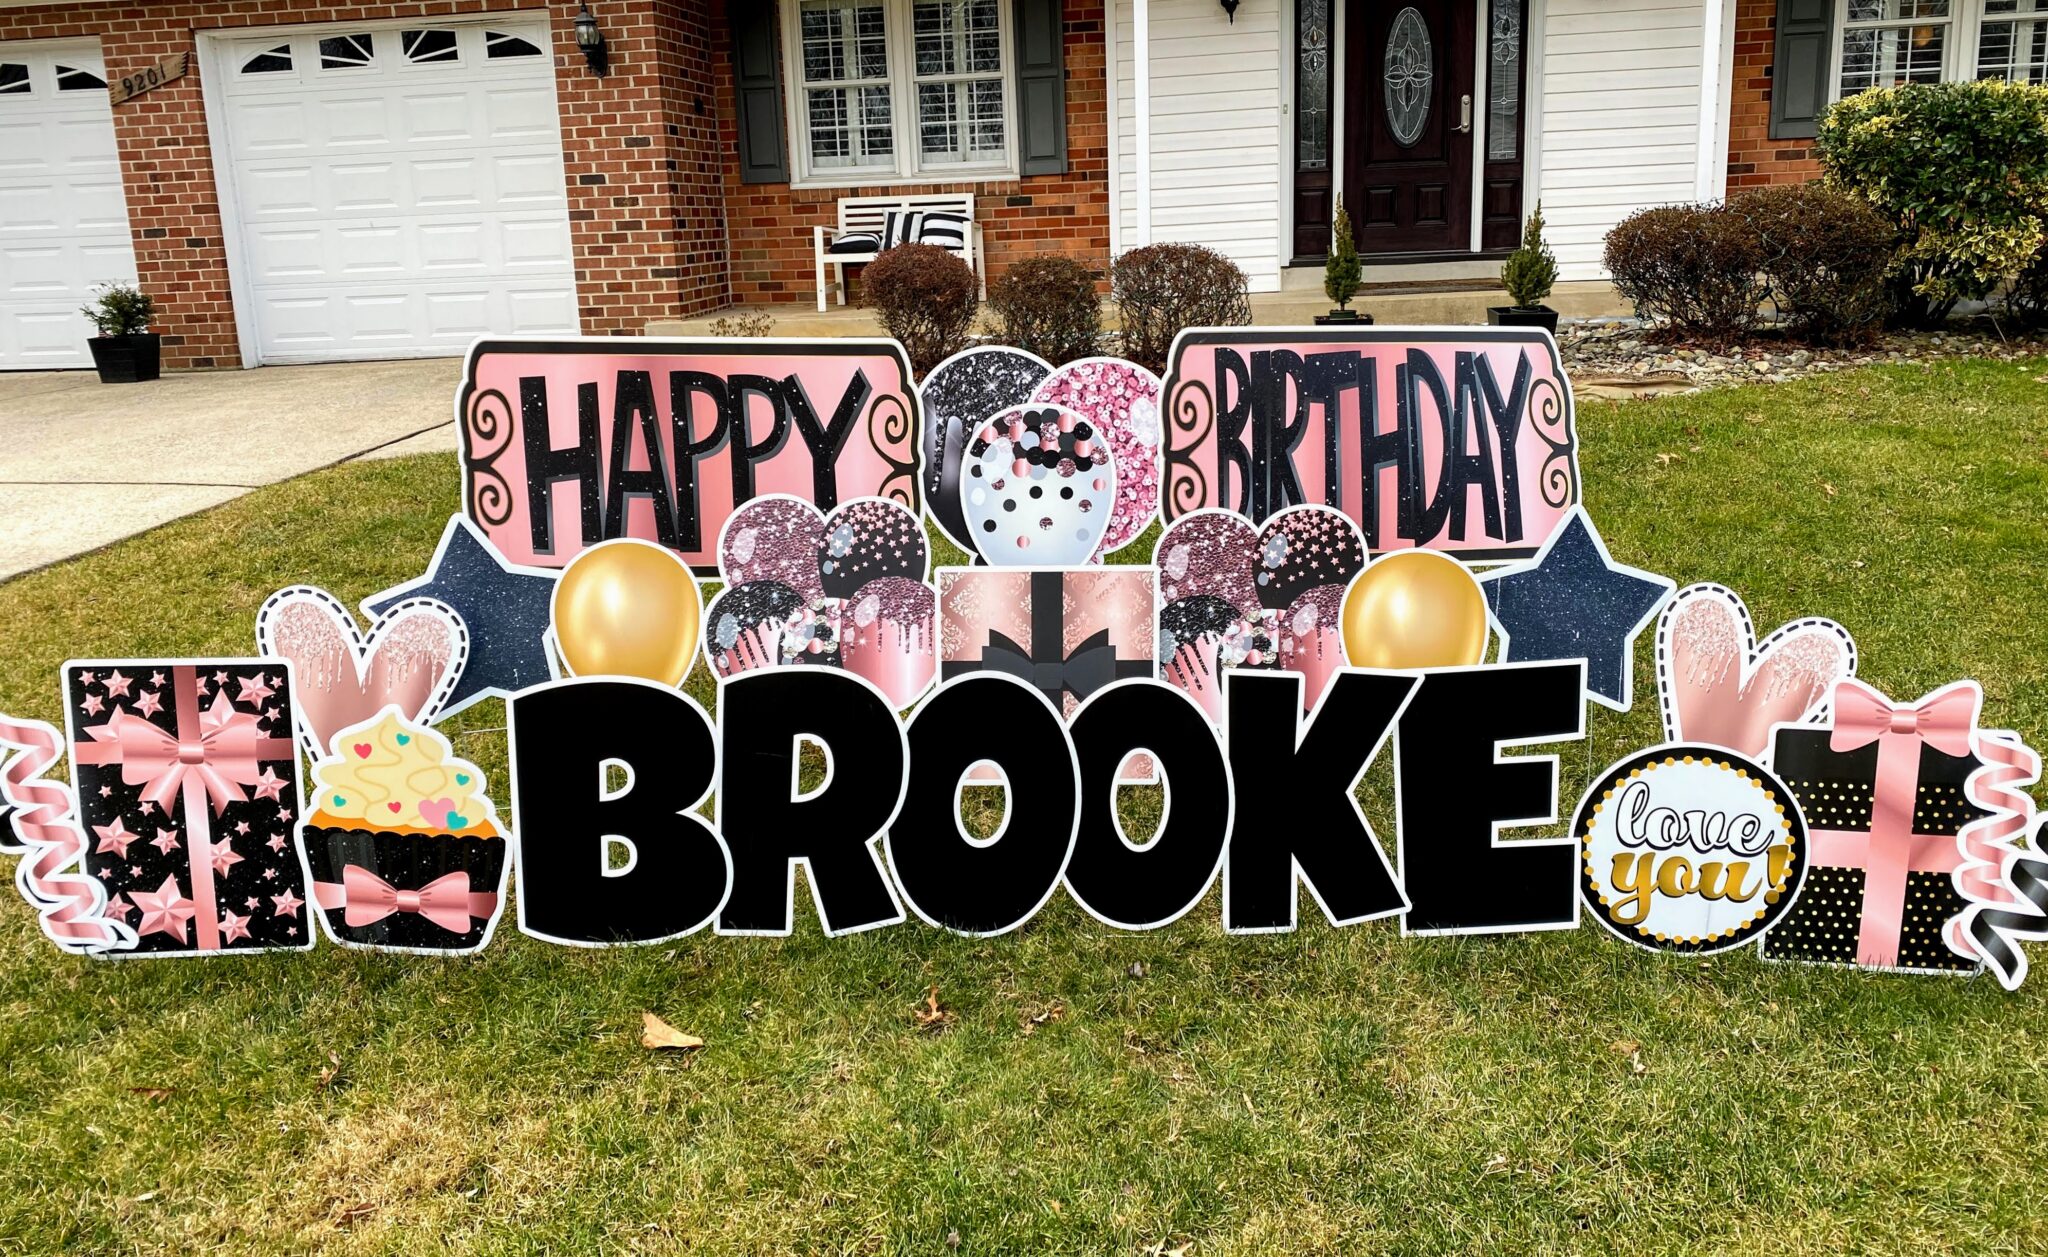 a happy birthday yard sign on a front lawn in Bowie, MD